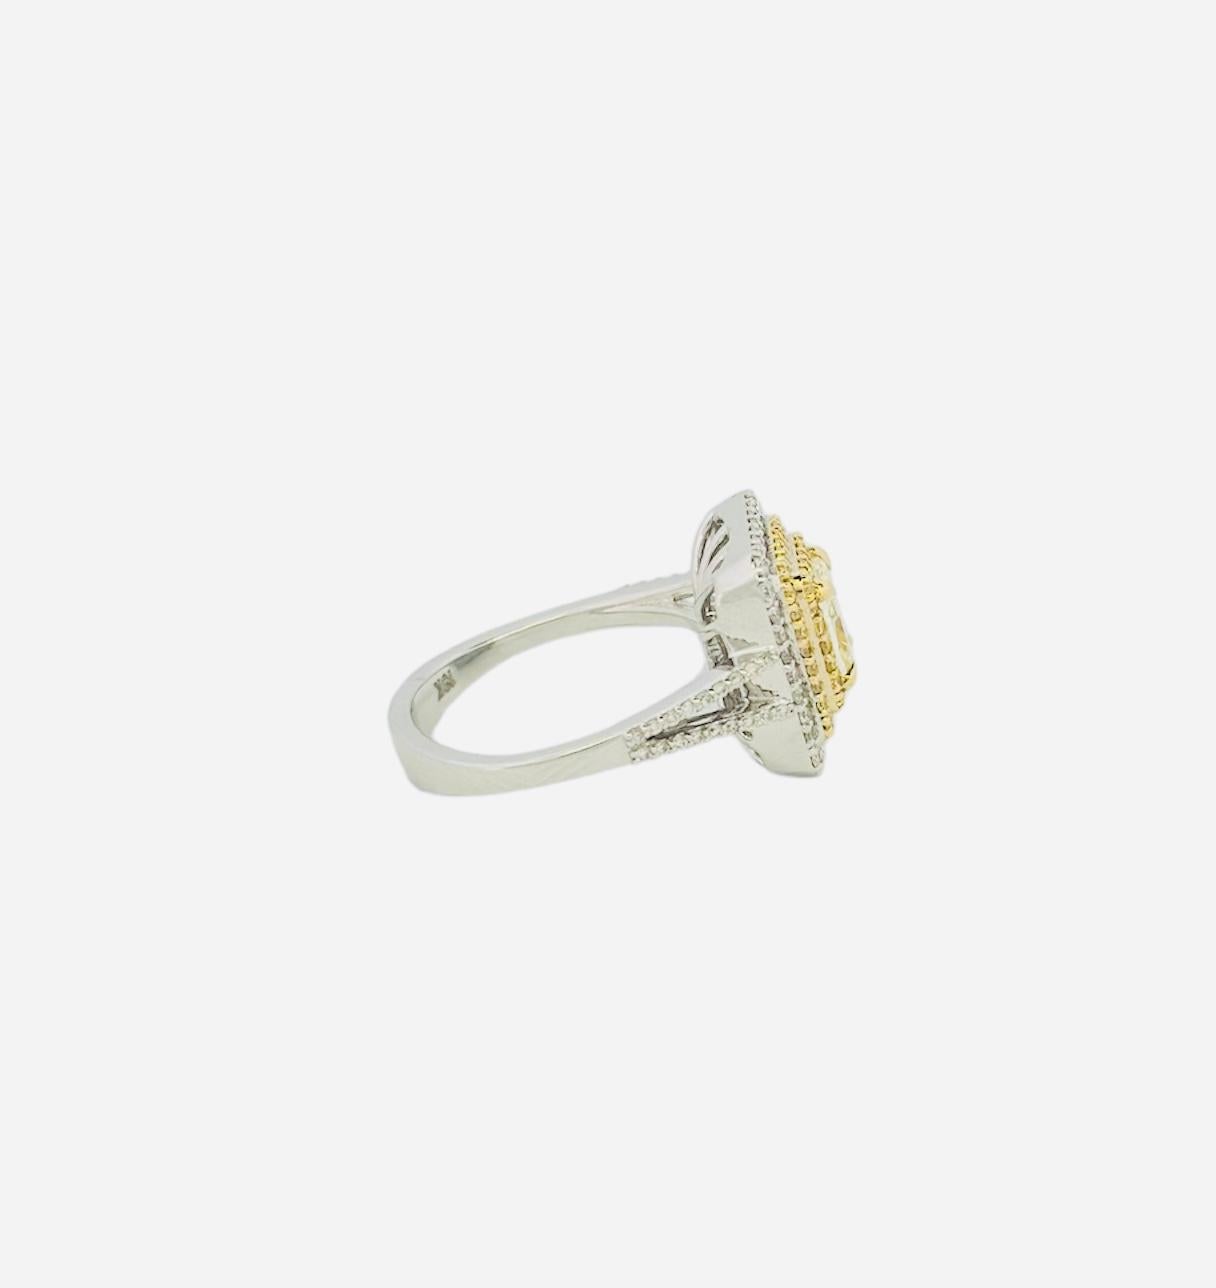 The stunning Yellow Cushion Shape Diamond Ring is a work of art that skillfully combines traditional elegance with modern craftmanship. A dazzling 1-carat cushion-shaped yellow diamond that sparkles like a flash of sunlight is the focal point of